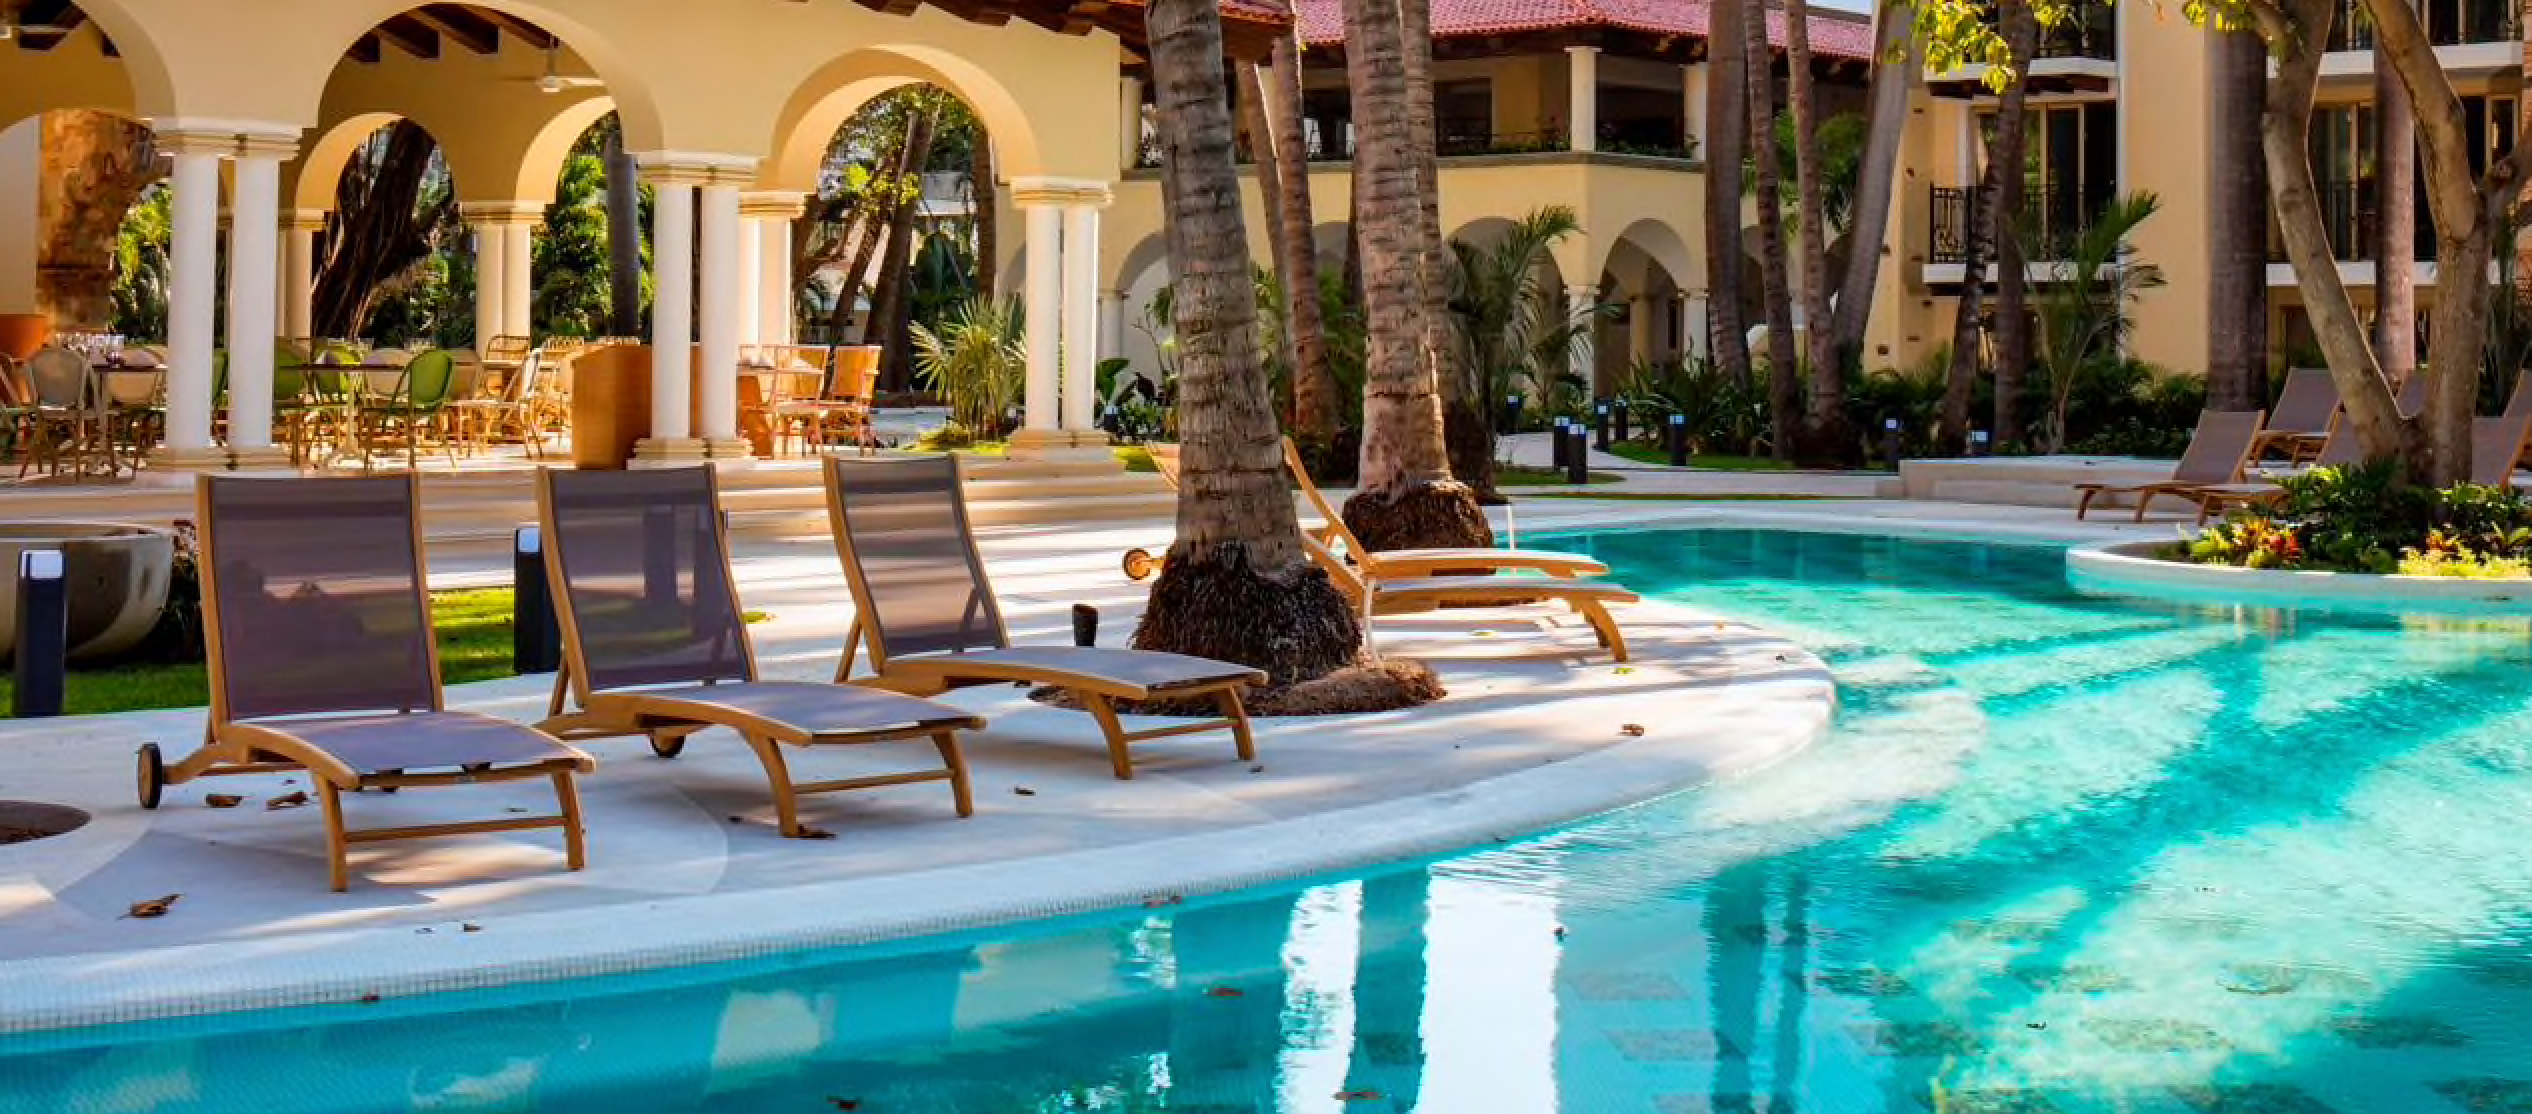 Hilton Puerto Vallarta Pool - Don&rsquo;t transfer points: It may be better to book an all-inclusive resort through your credit card portal